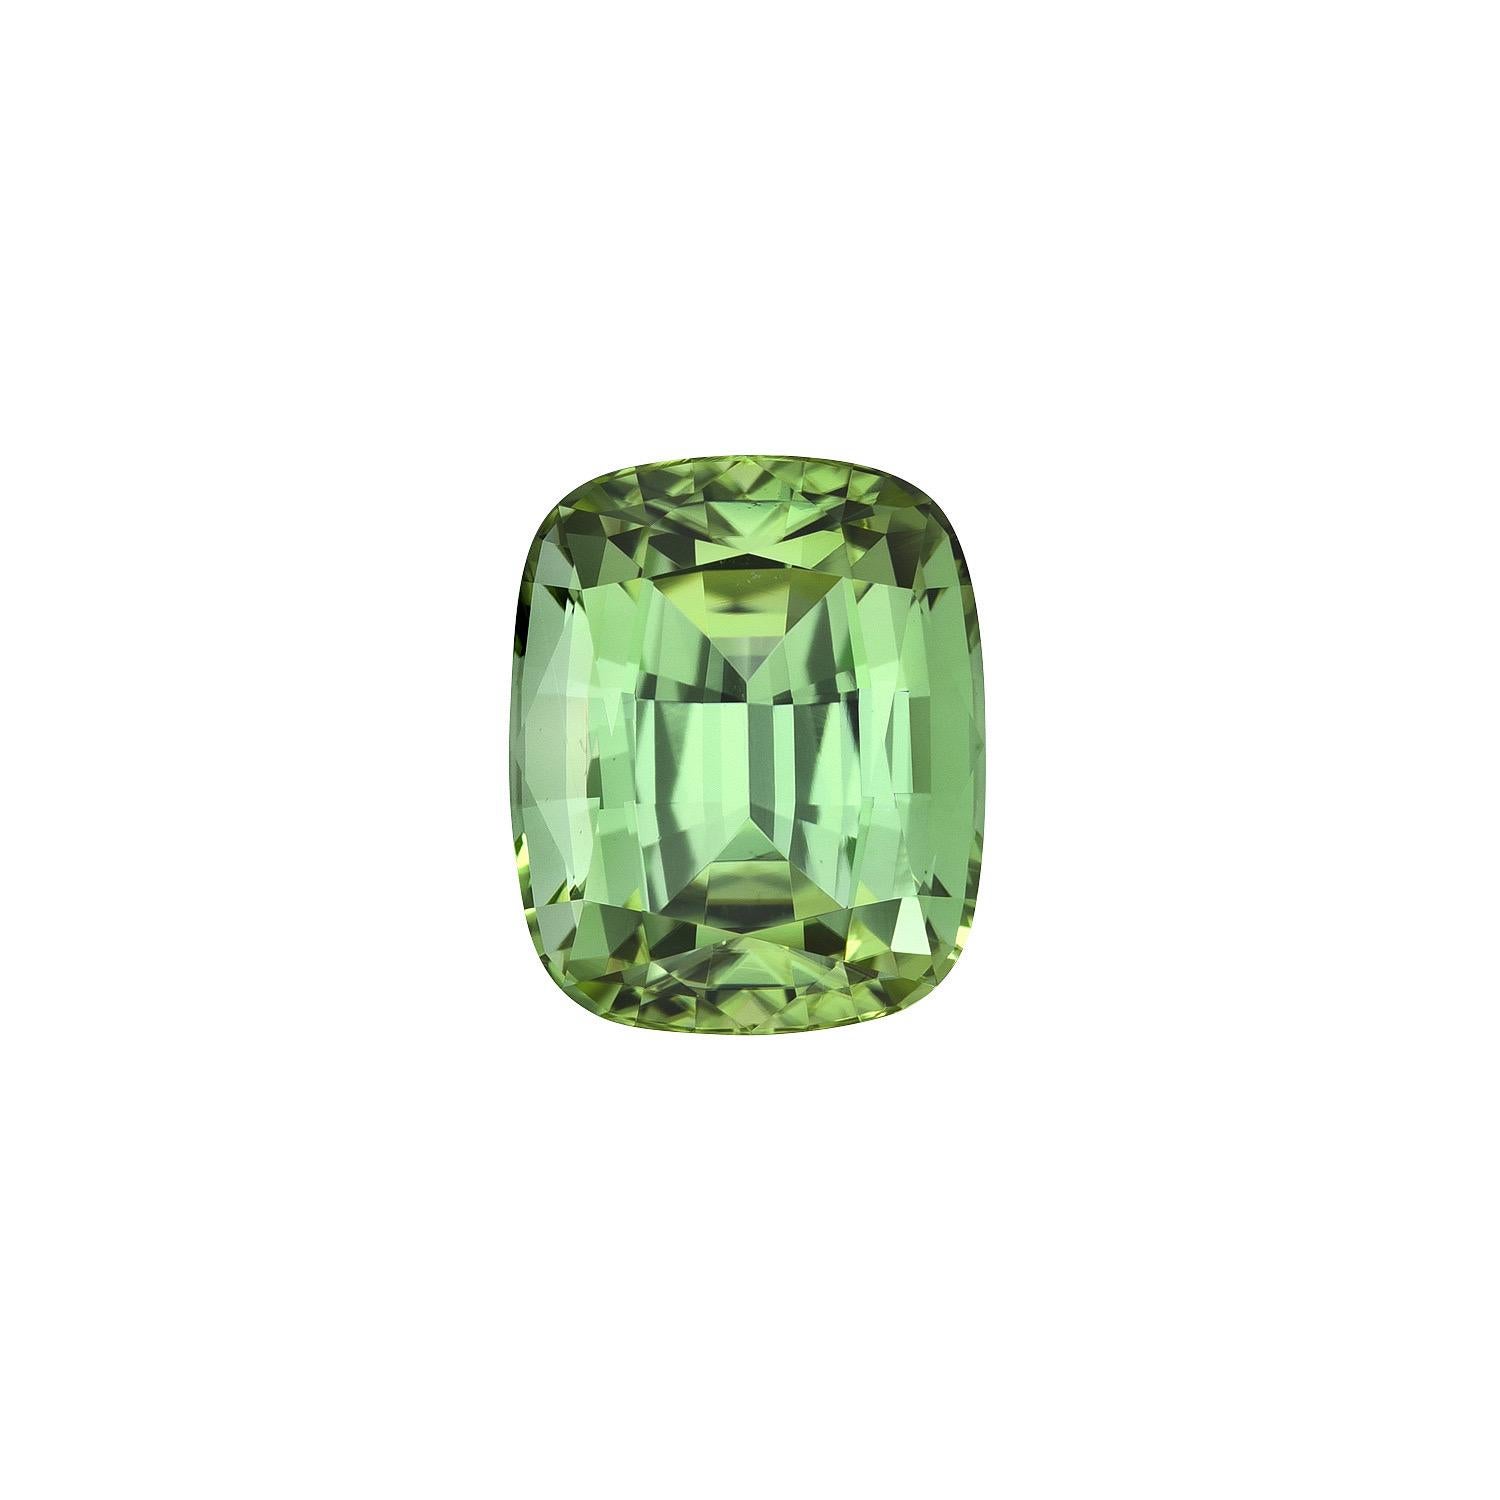 Contemporary Mint Green Tourmaline Ring Gem 4.49 Carat Unmounted Cushion Loose Gemstone For Sale